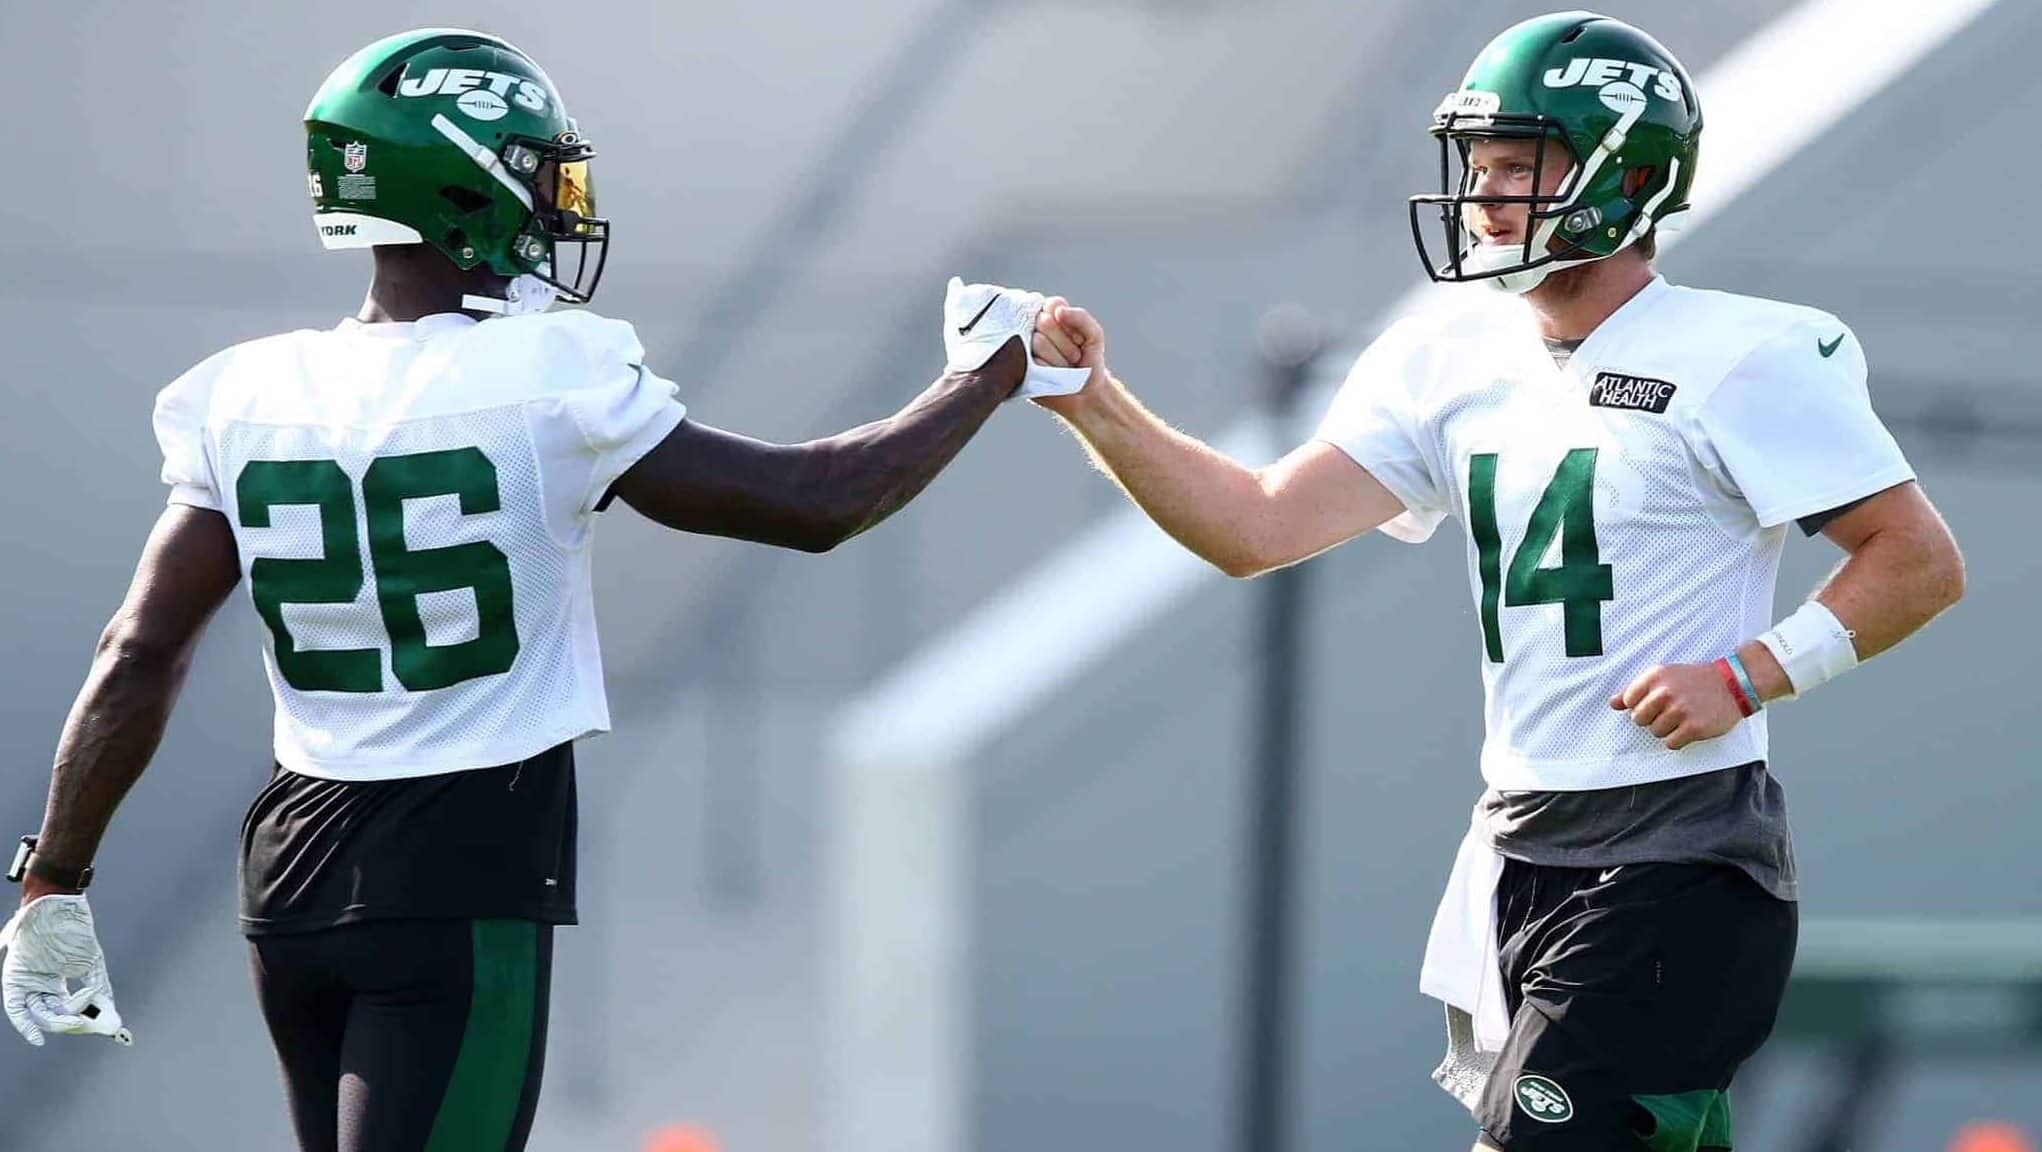 FLORHAM PARK, NEW JERSEY - AUGUST 14: Sam Darnold #14 and Le'Veon Bell #26 of the New York Jets fist bump at Atlantic Health Jets Training Center on August 14, 2020 in Florham Park, New Jersey.